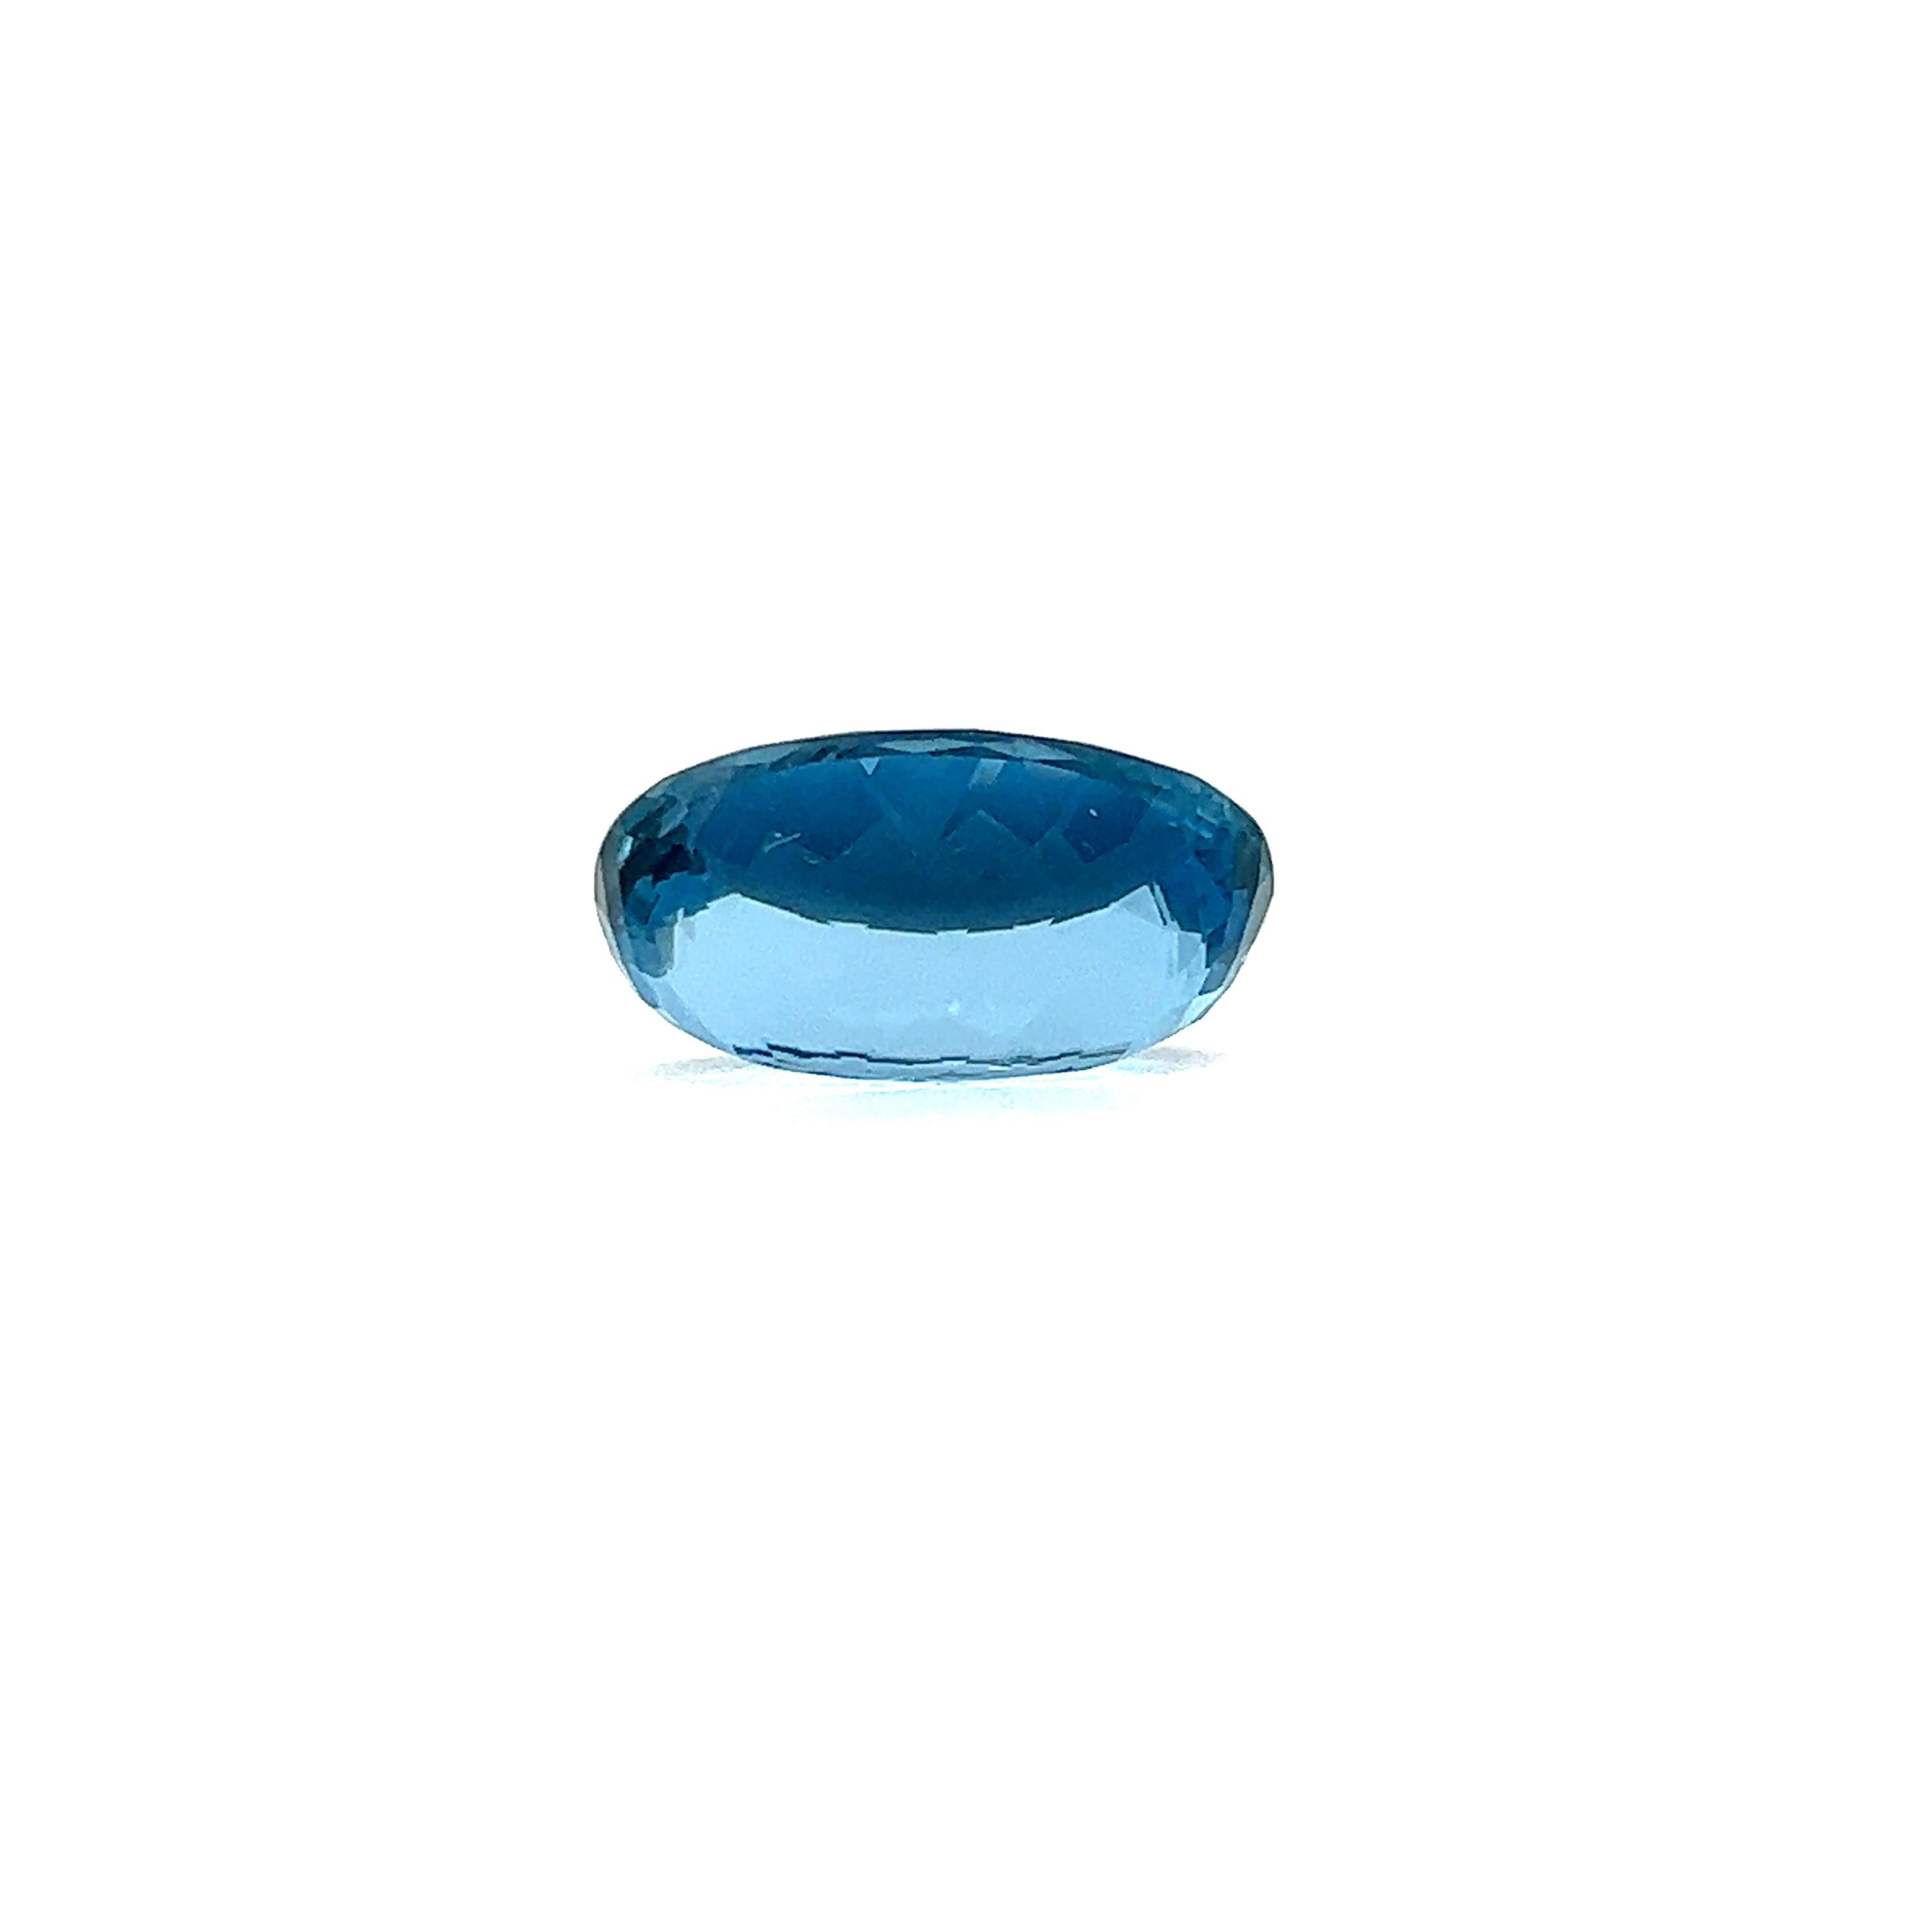 This one of a kind deep sea blue Santa Maria Aquamarine weighing 6.89 carats is absolutely stunning and is definitely a collectible piece. As with any aquamarine, this spectacular gem is free of internal inclusions and it has much more saturation